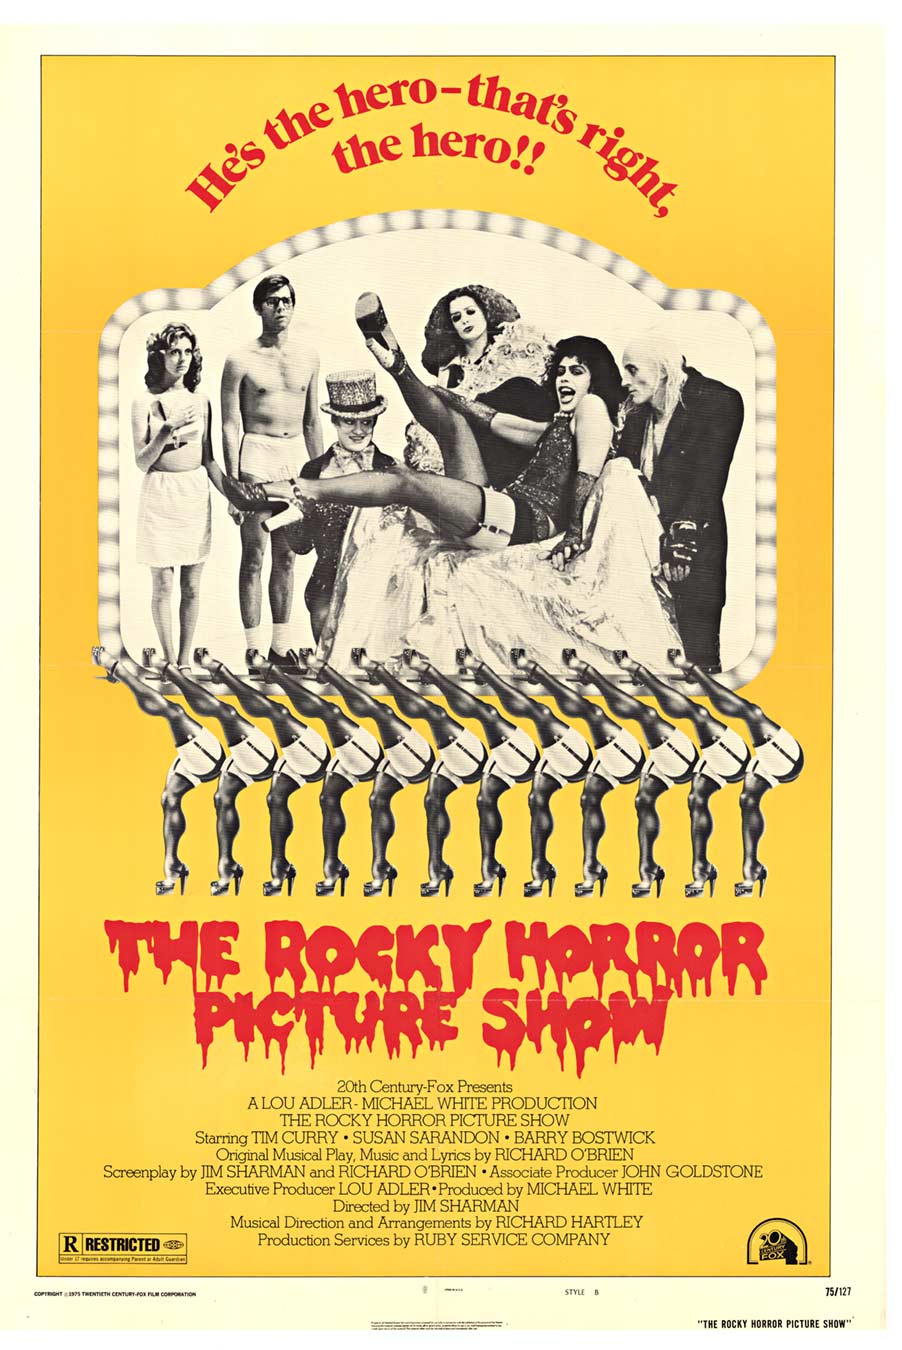 The Rocky Horror Picture Show, Anonymous Artists